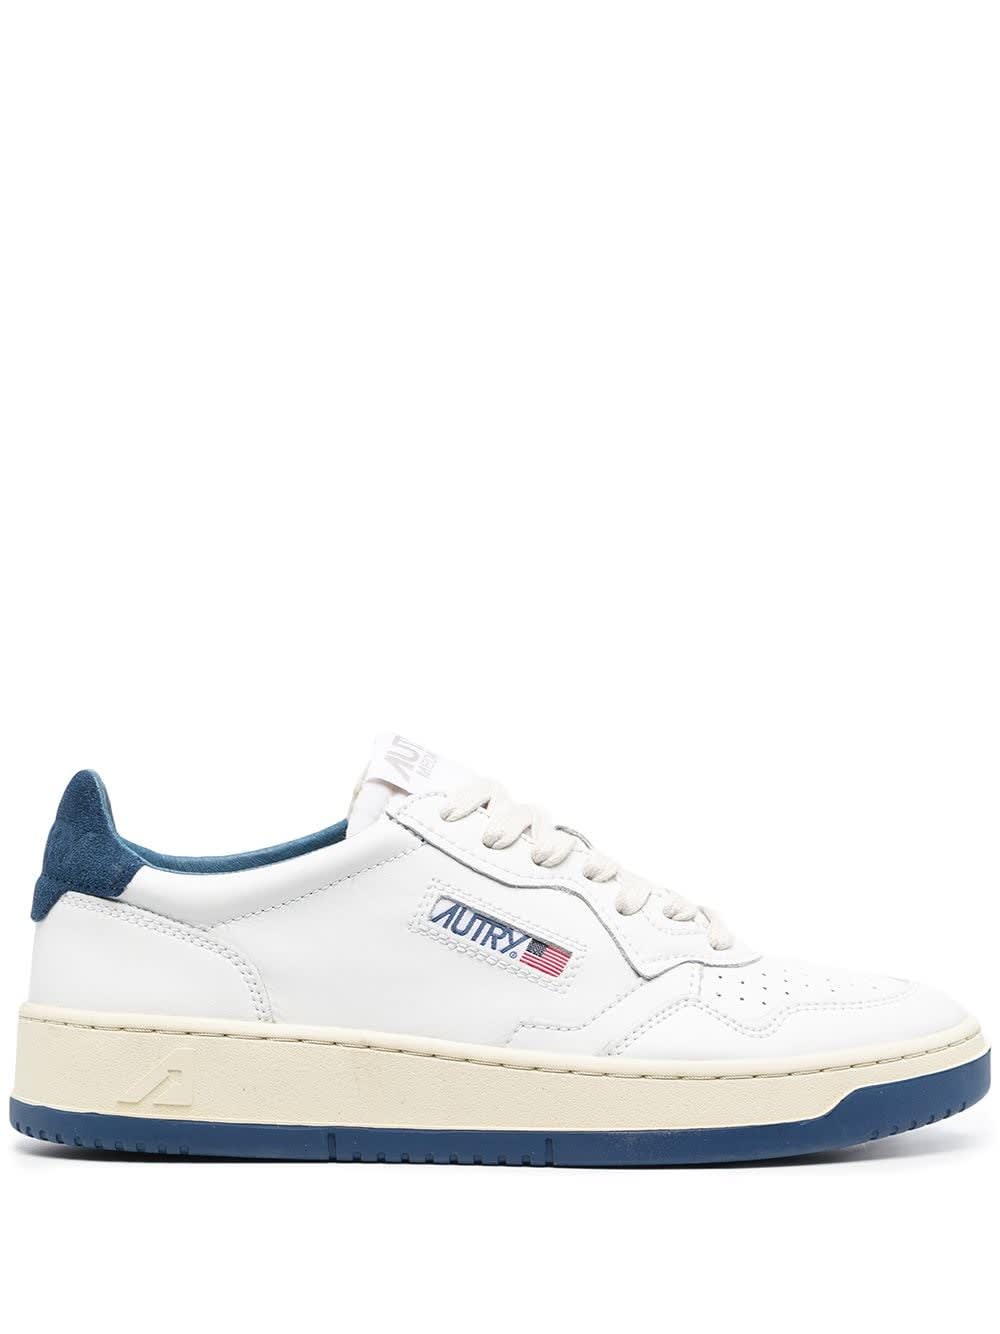 Autry 01 Low Sneakers In White And Blue Leather